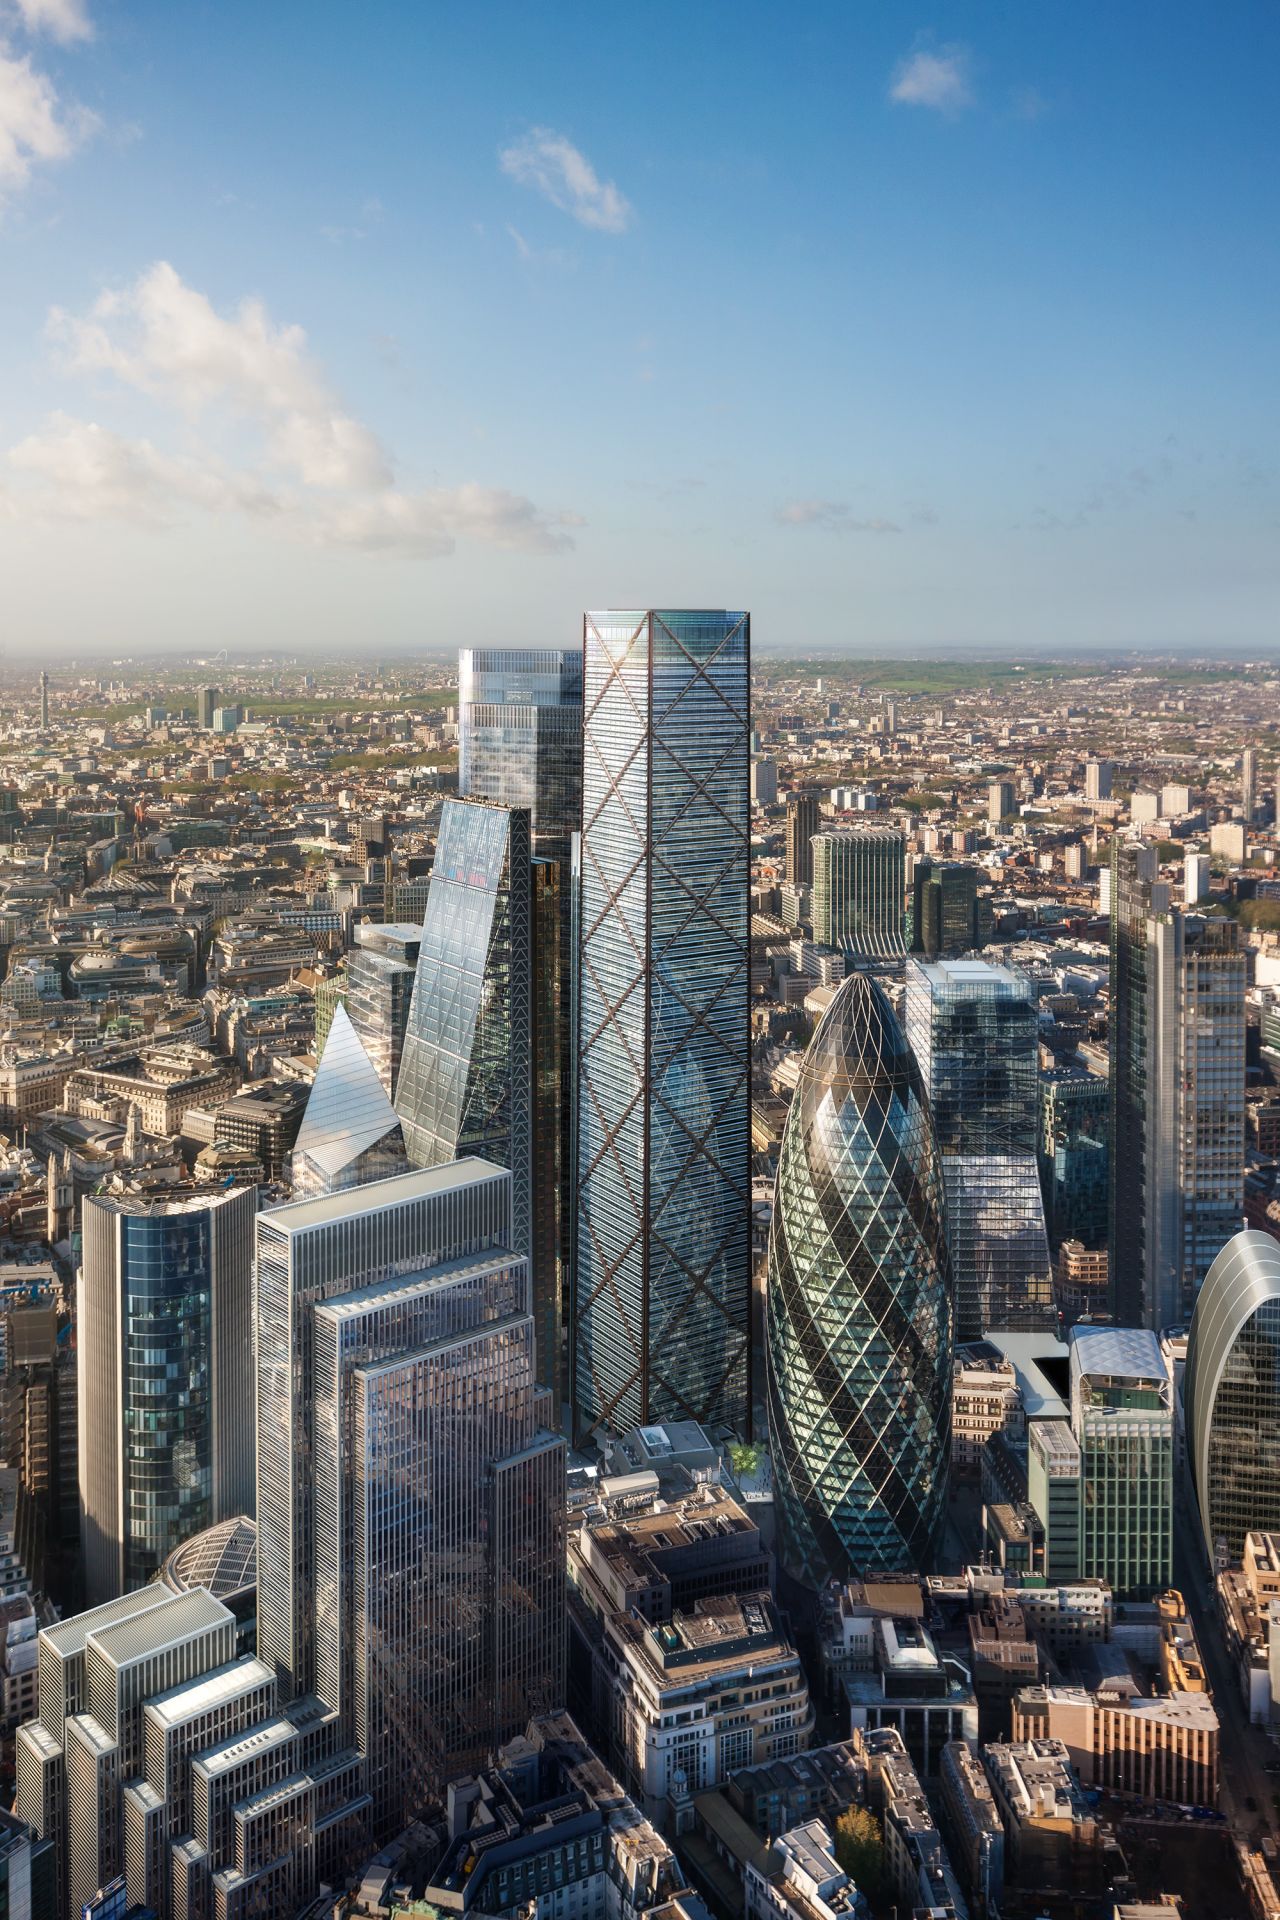 In December 2015, plans were unveiled for the 1 Undershaft -- a 300m tall building that could become the City of London's tallest building. <br /><strong>Height: </strong>300m (984ft) <br /><strong>Floors: </strong>73<br /><strong>Architect: </strong>Aroland Holdings